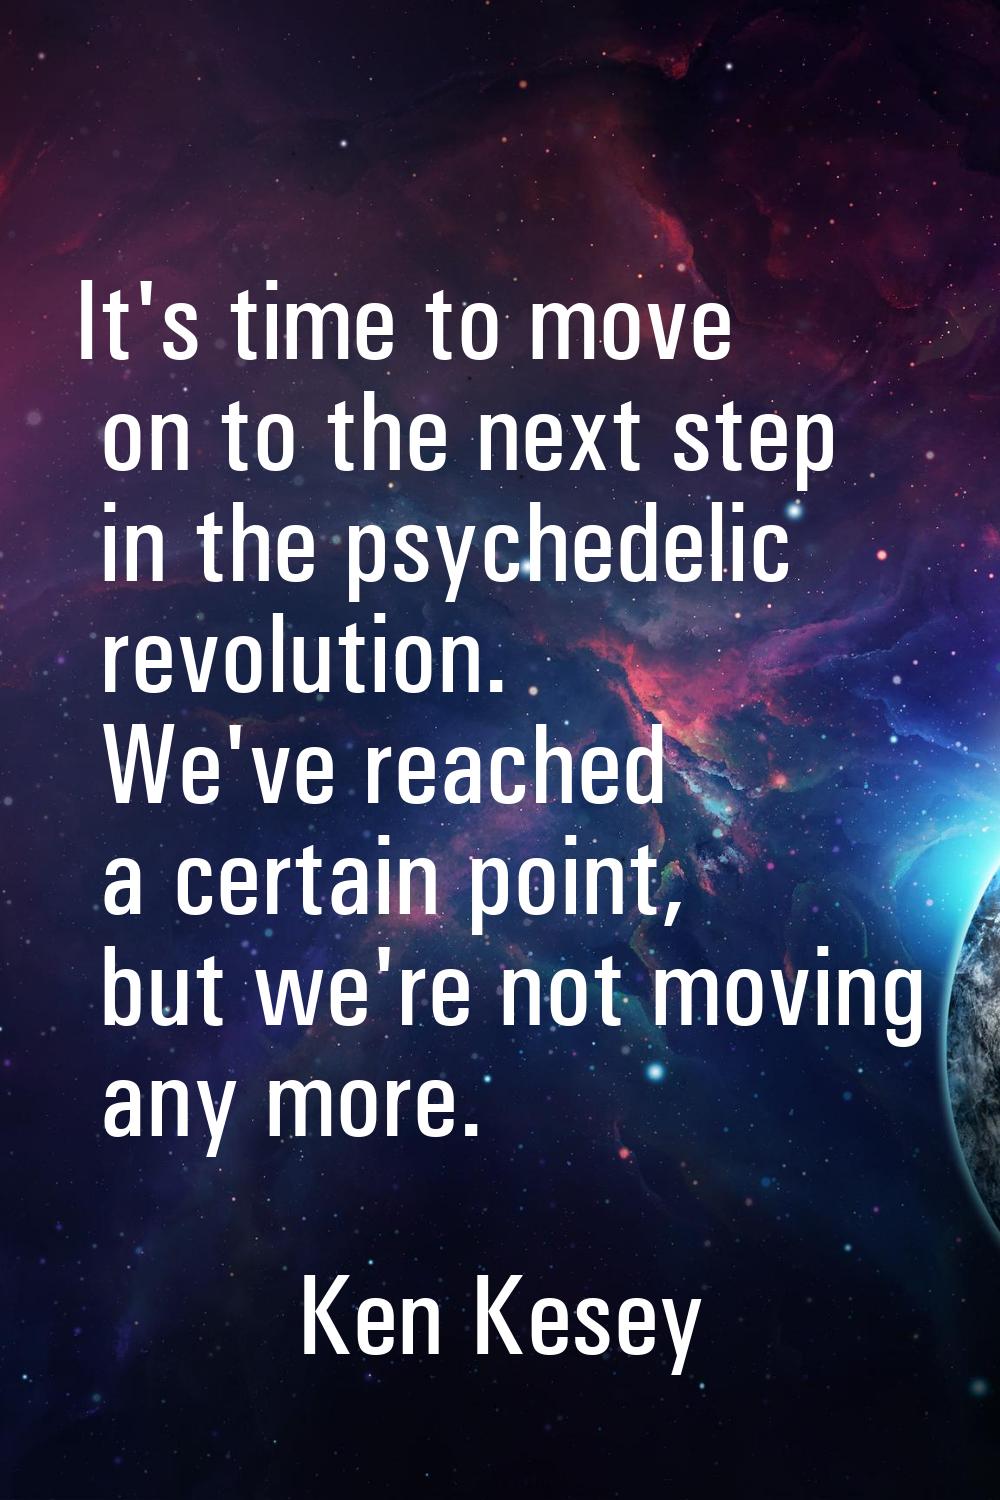 It's time to move on to the next step in the psychedelic revolution. We've reached a certain point,